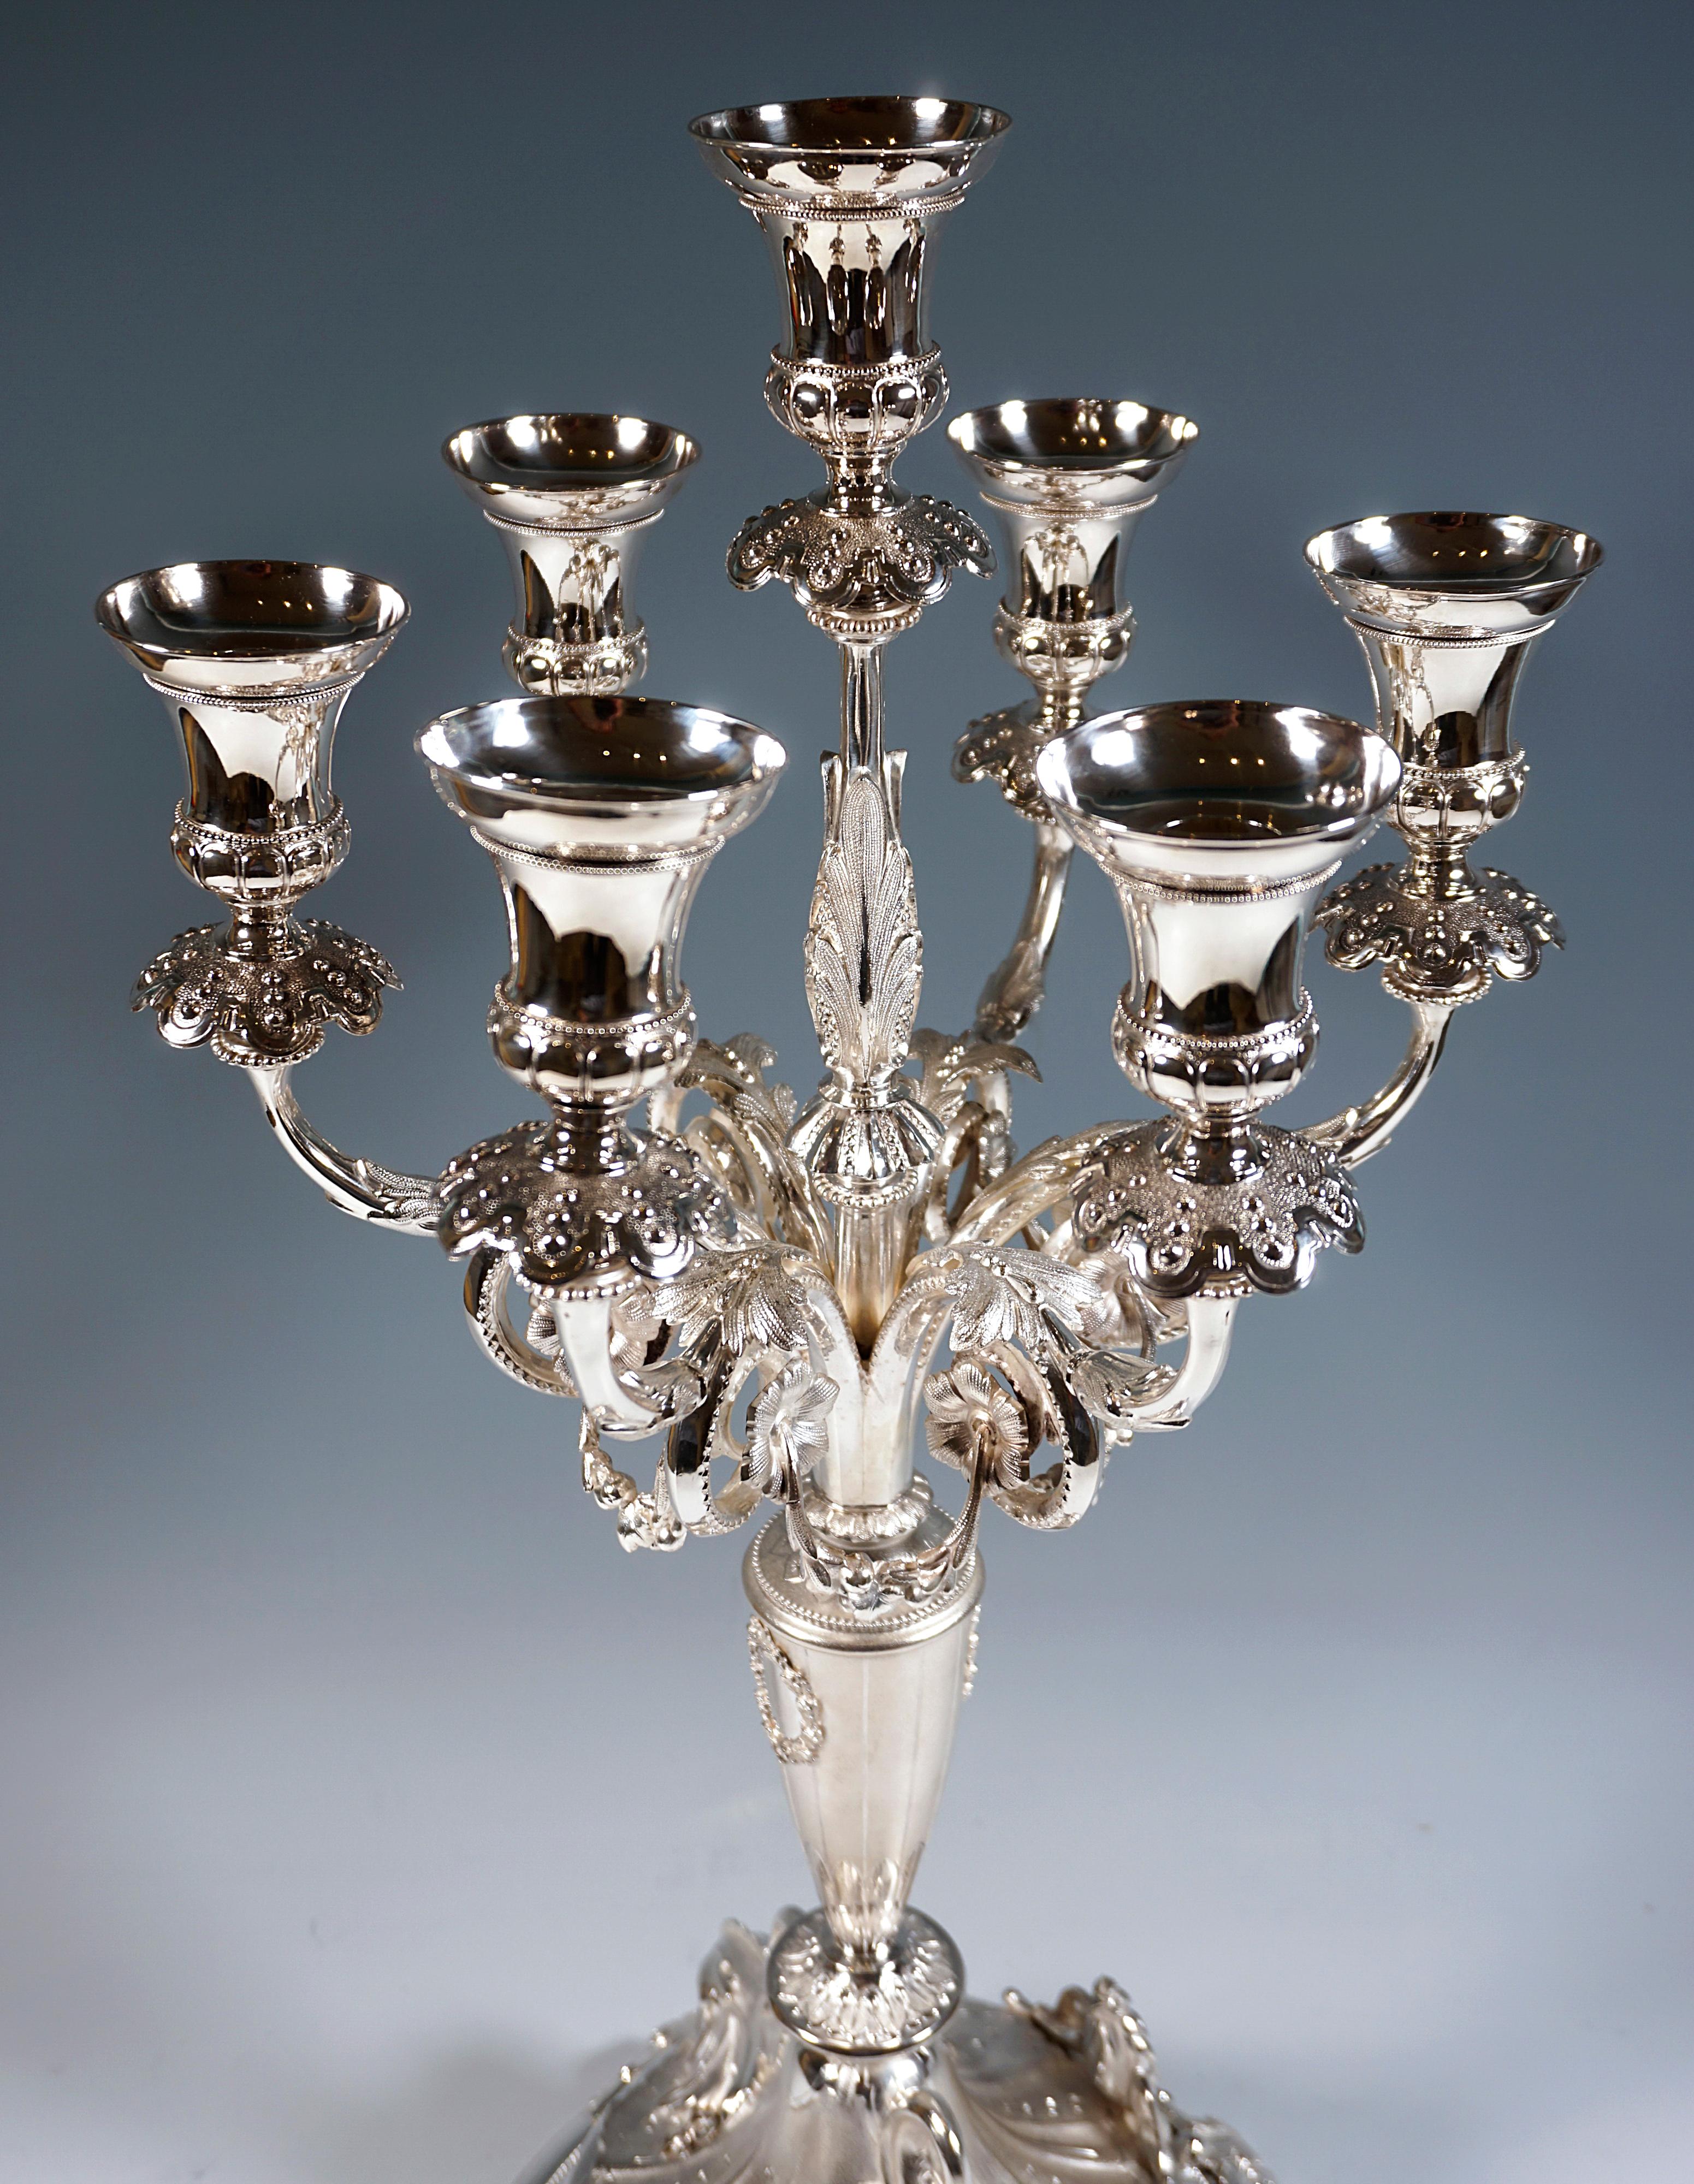 Hand-Crafted Pair Of 7-Flame Silver Candelabras With Dolphins, Wilkens & Sons Germany, 1877